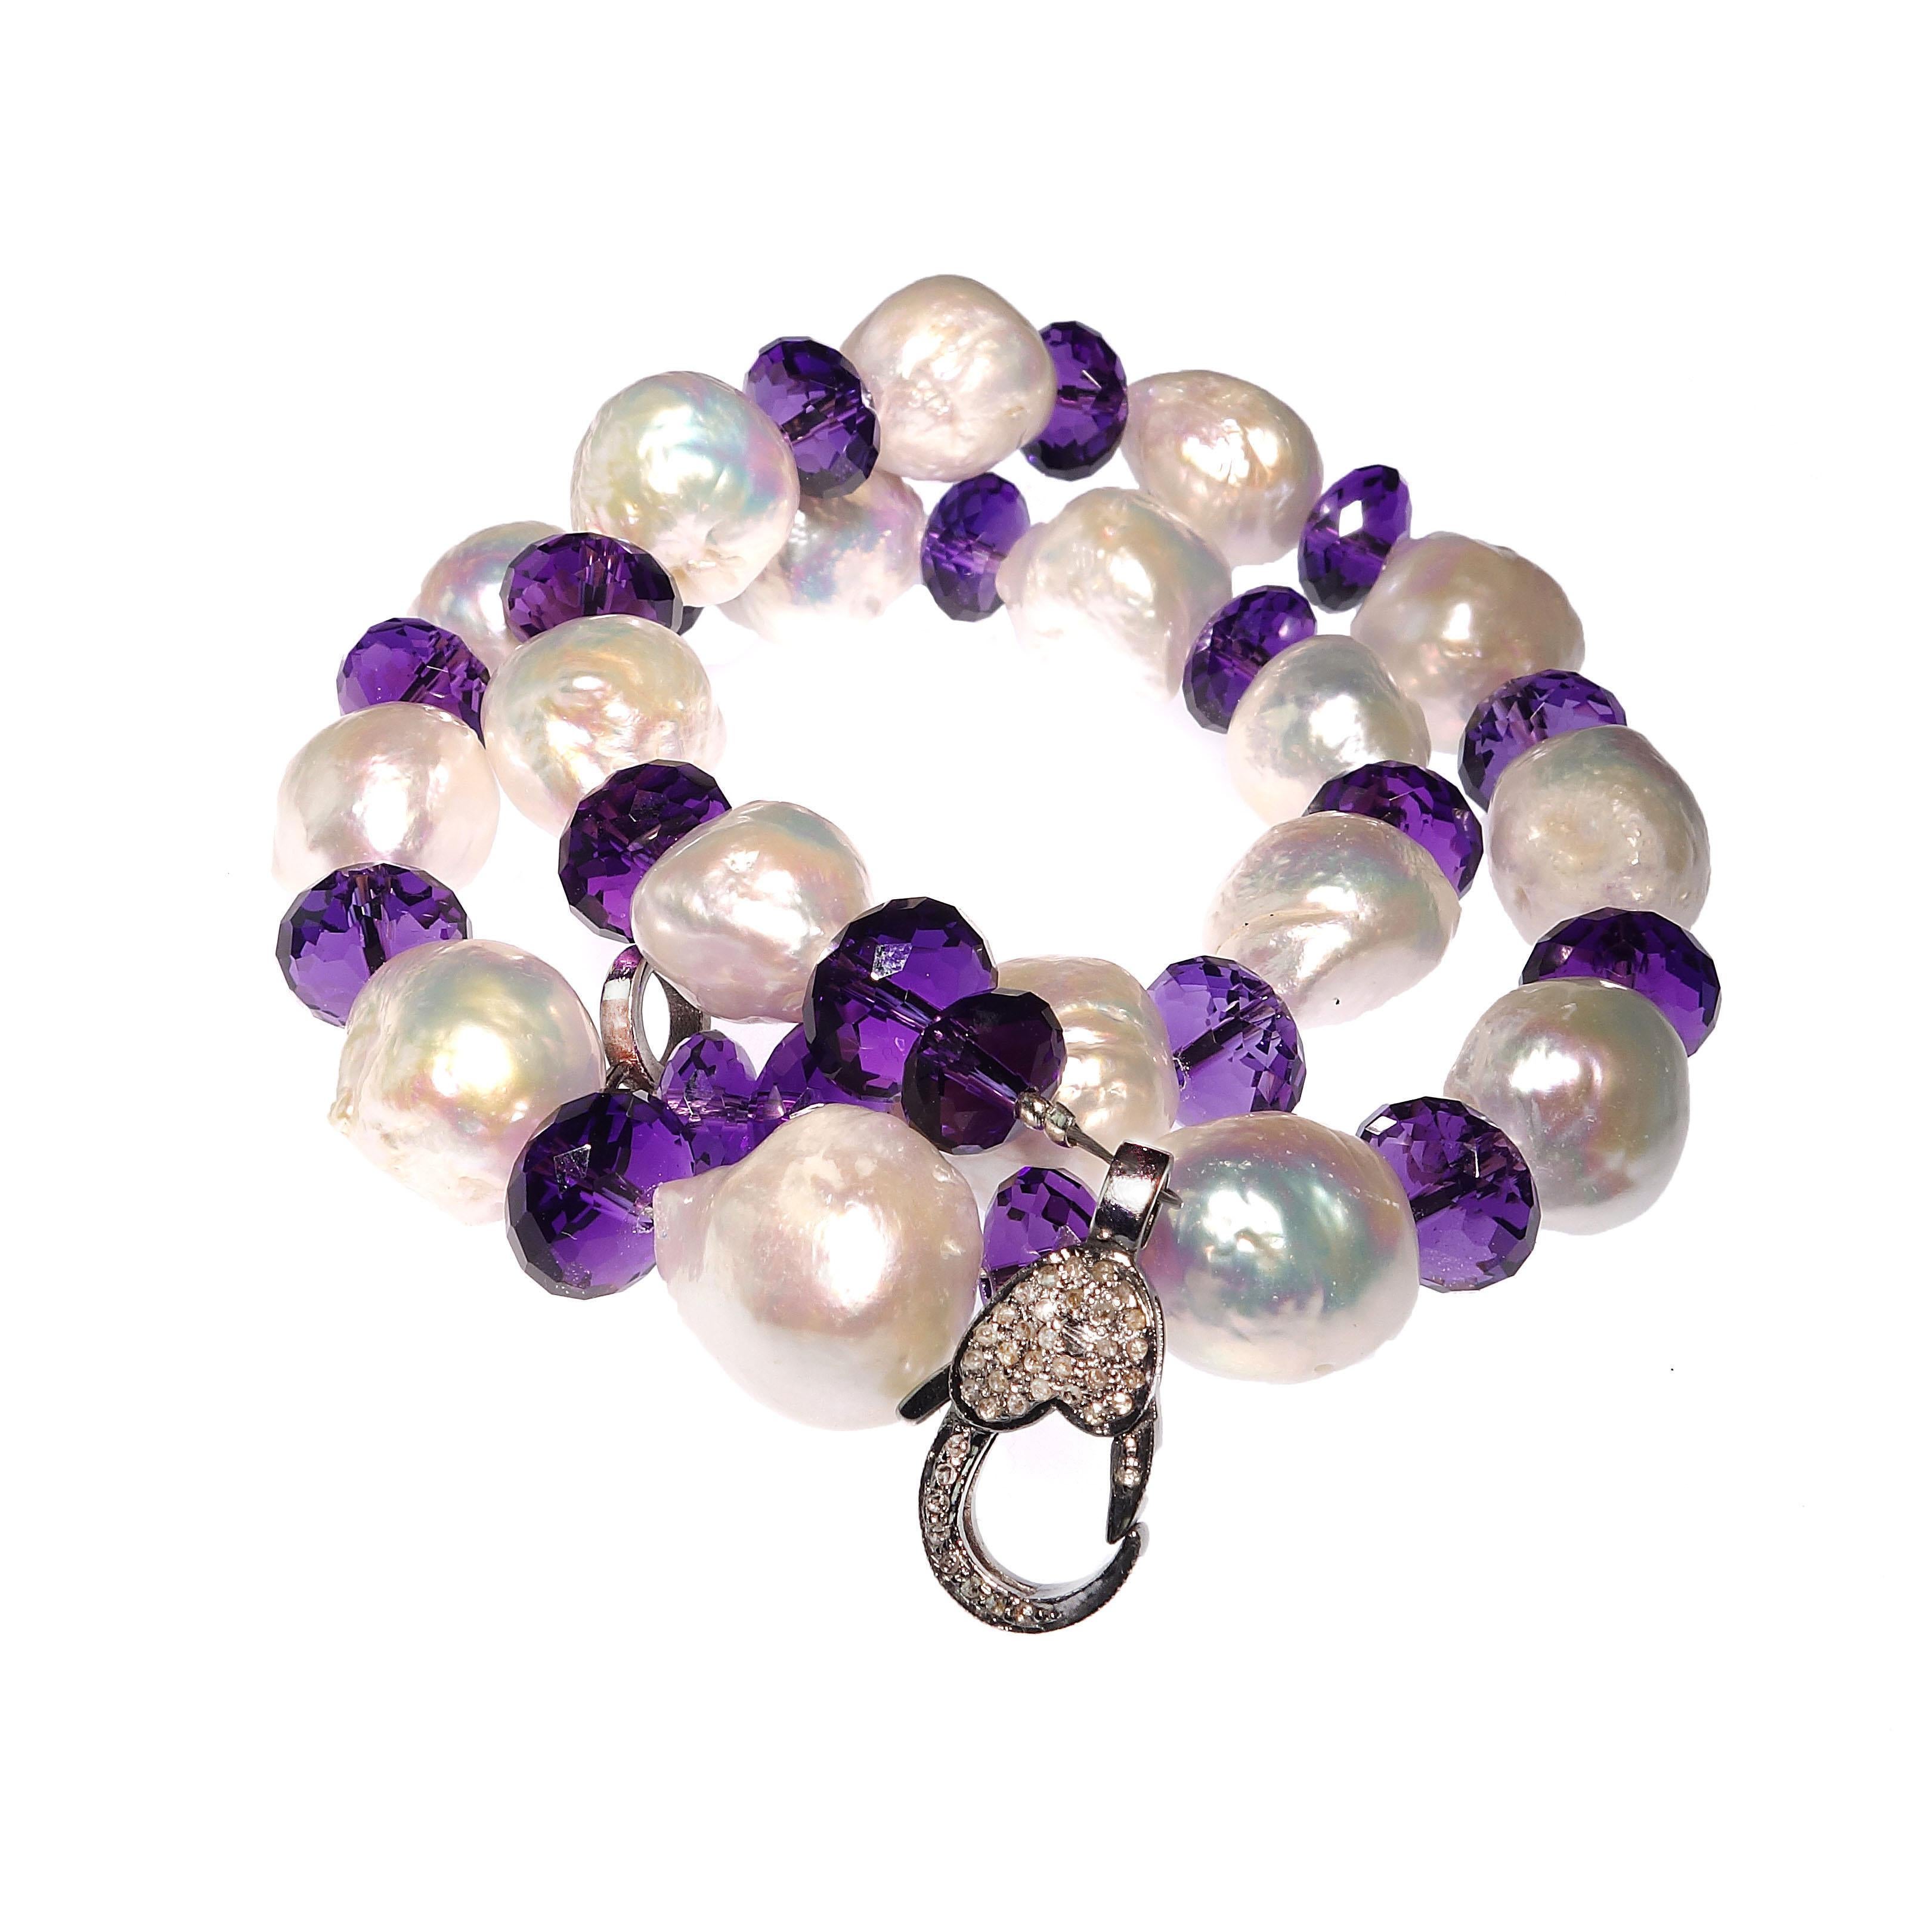 Own the jewelry you desire.

Custom made Glittering Amethyst Rondelles Alternating with Iridescent Baroque Pearl Necklace. Sparkling Amethysts enhance the pink iridescence of the baroque pearls. This gorgeous necklace features a diamond studded